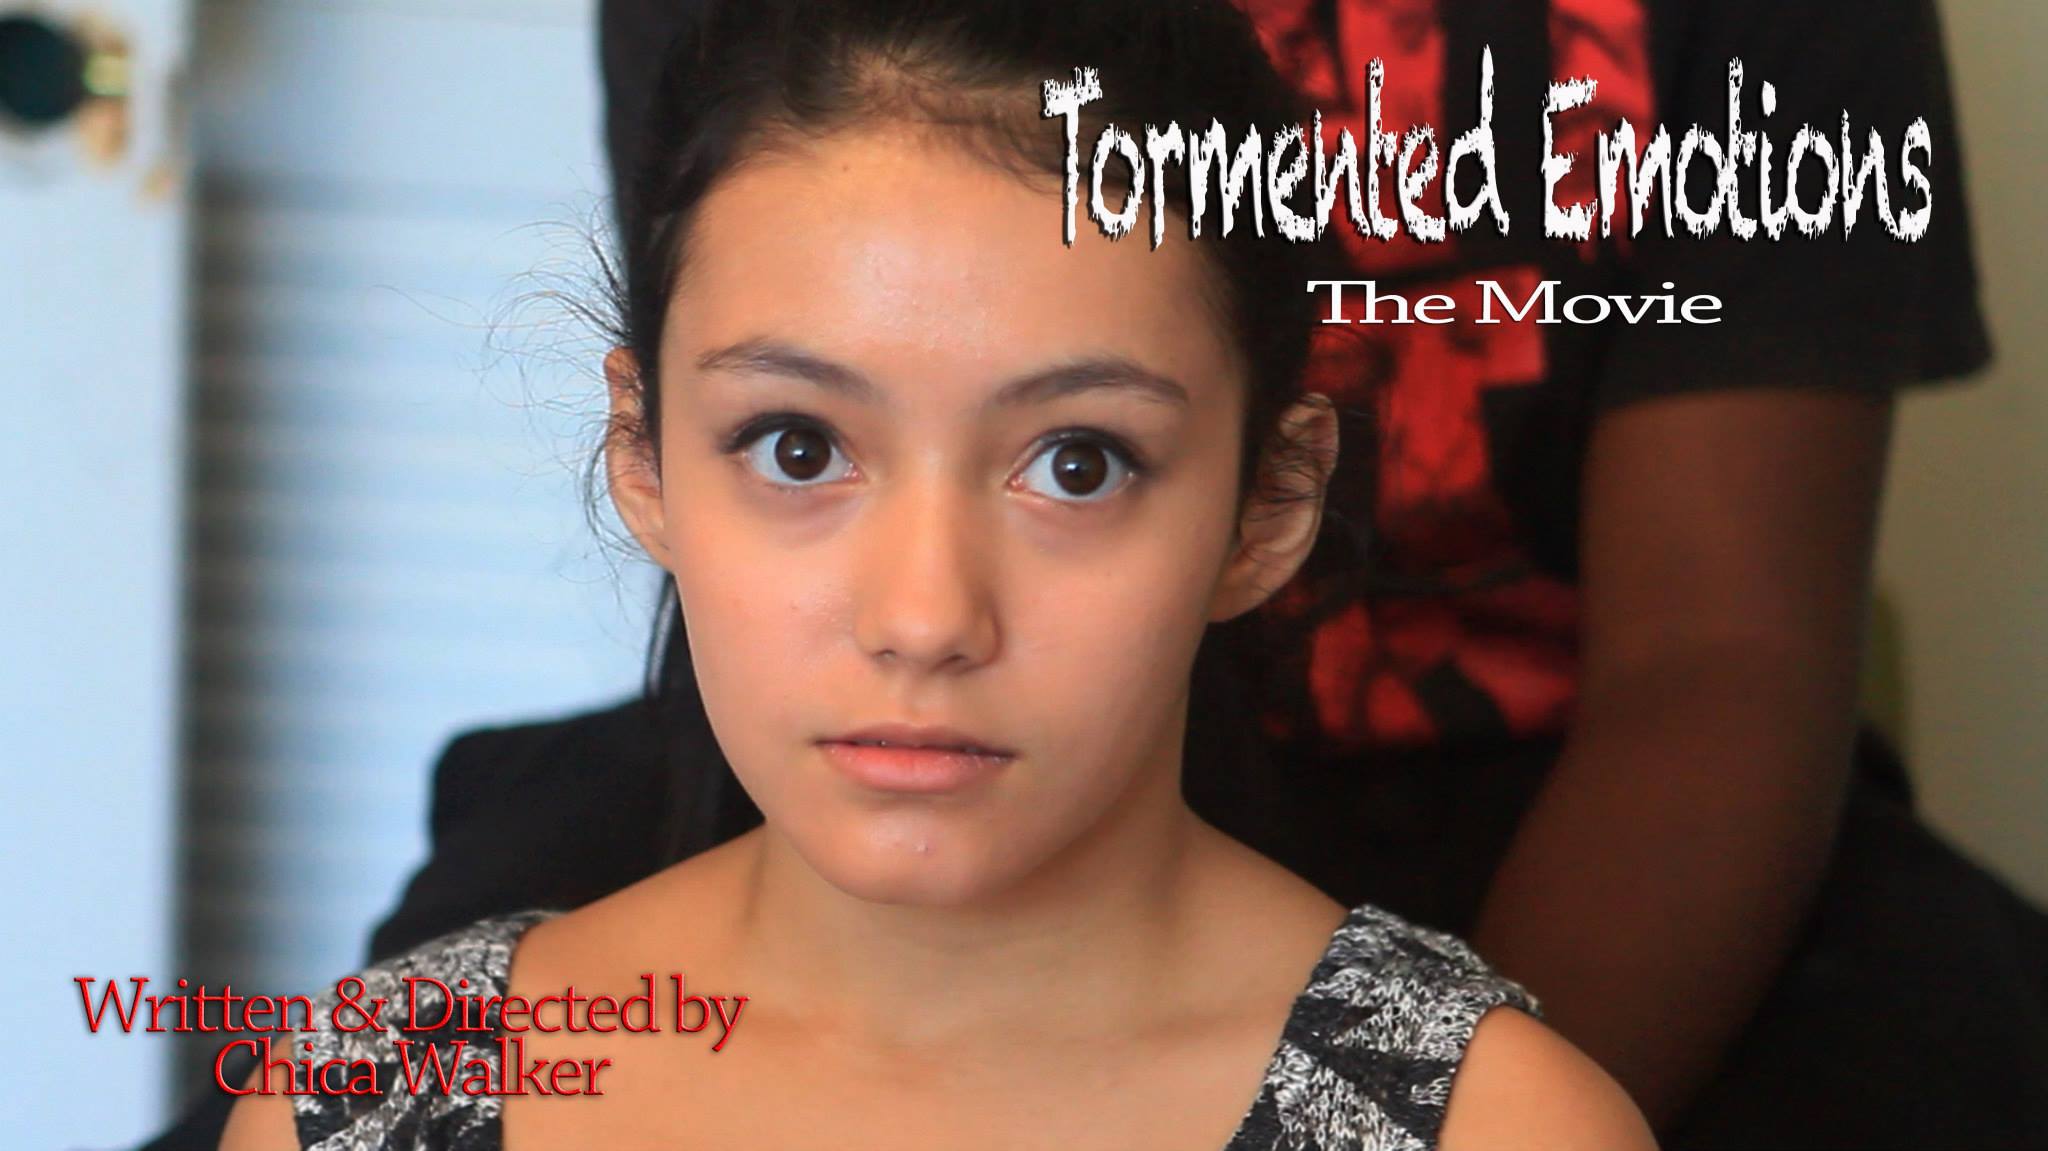 One of the cover pictures for the short film 'Tormented Emotions' directed by Chica Walker.